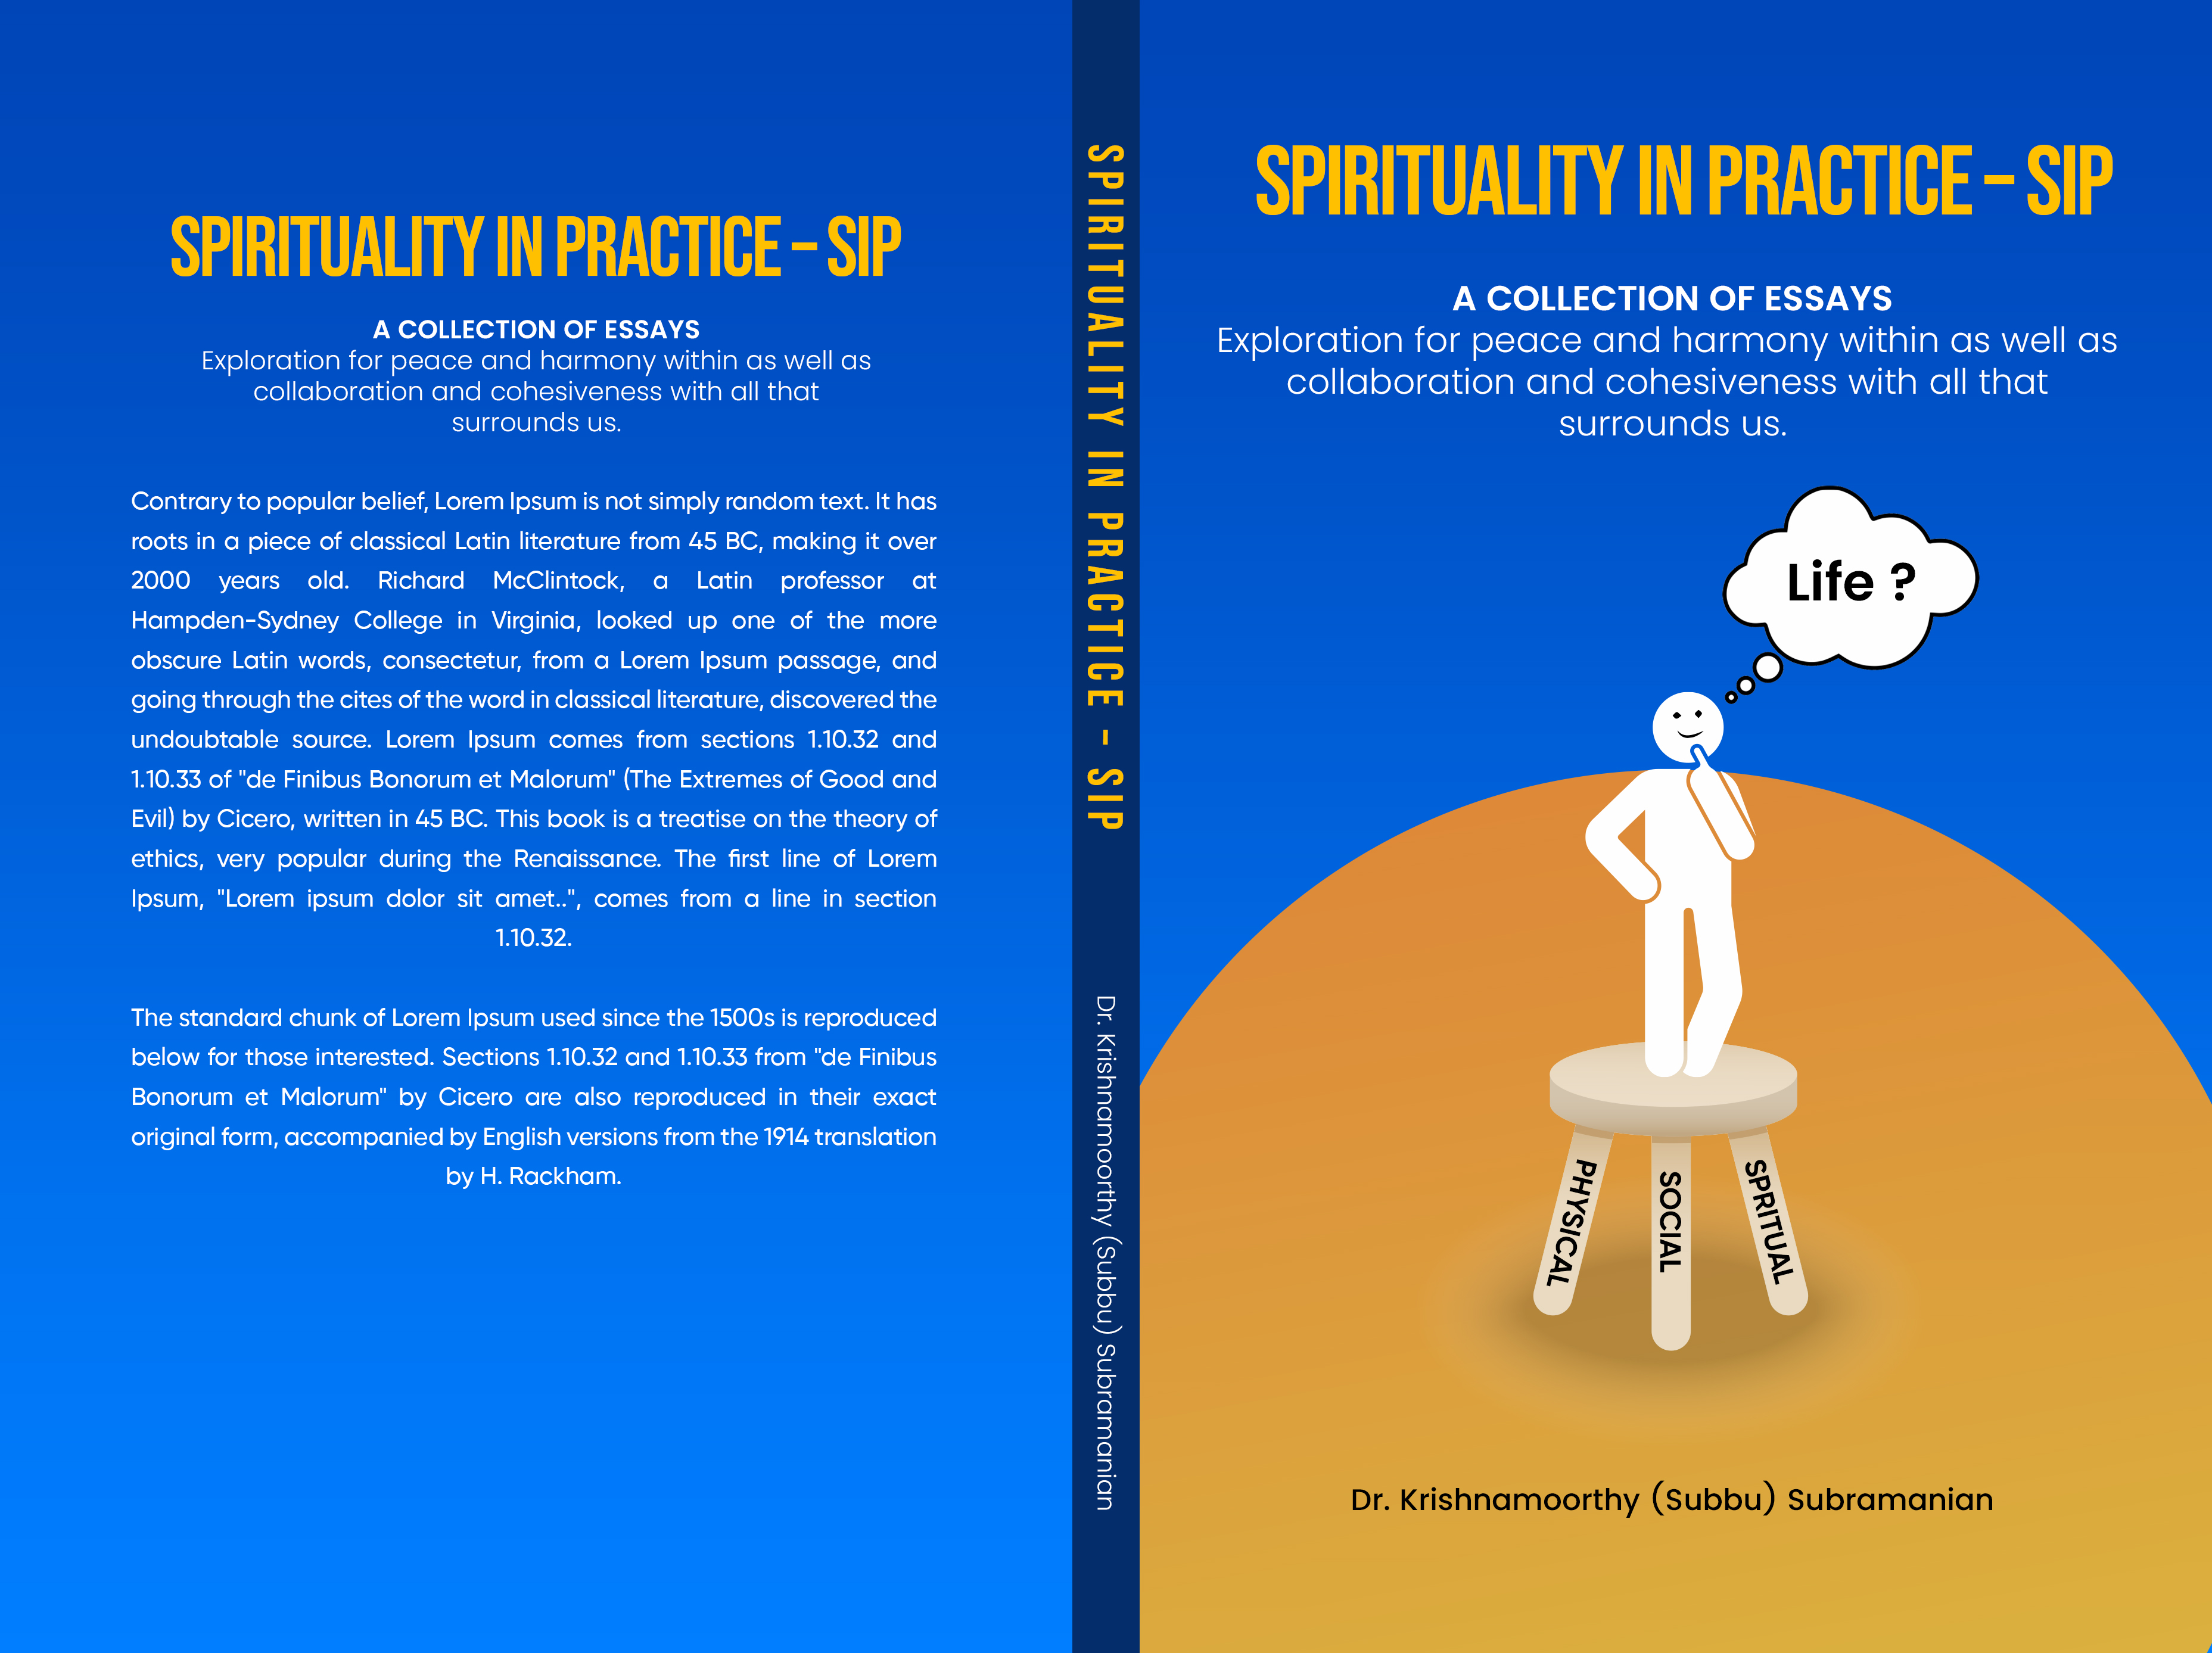 Author Dr. Krishnamoorthy (Subbu) Subramanian's New Book "Spirituality in Practice - SiP" Is  A Collection of Essays Reflecting On "How To Live With Peace And Harmony In Life?"